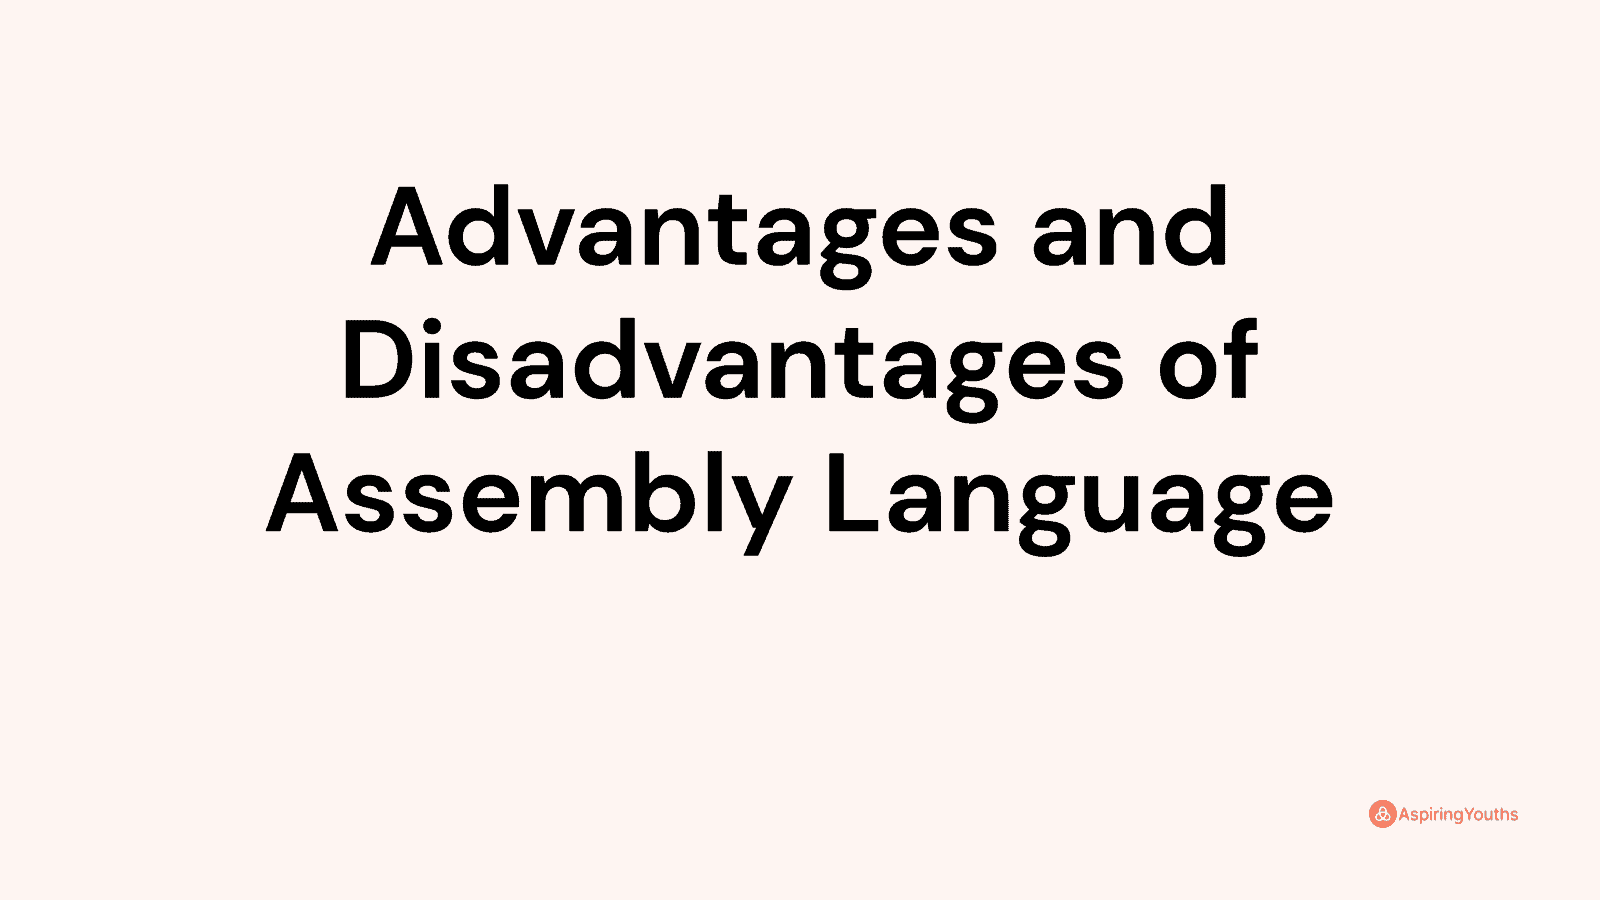 Advantages and disadvantages of Assembly Language